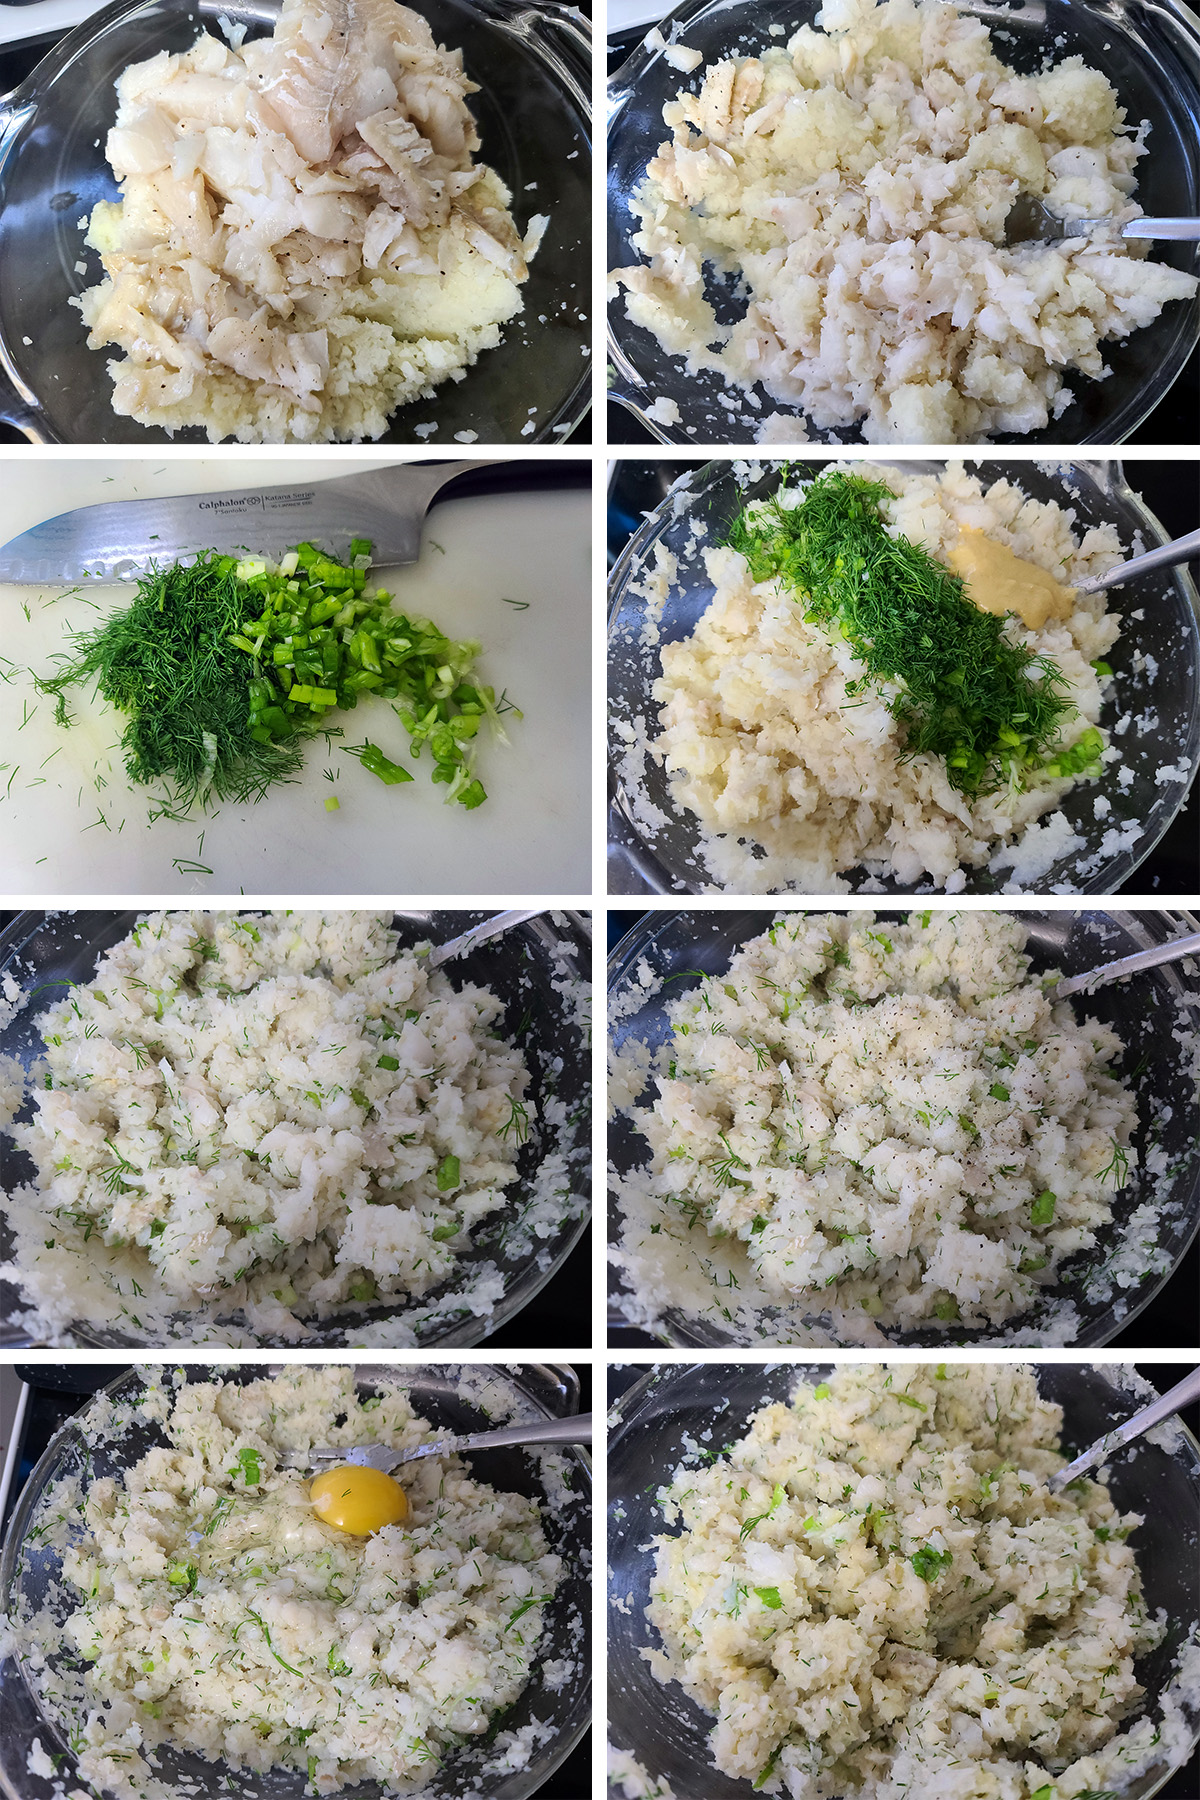 An 8 part image showing the fish and cauliflower being mixed together with the other flavouring ingredients.